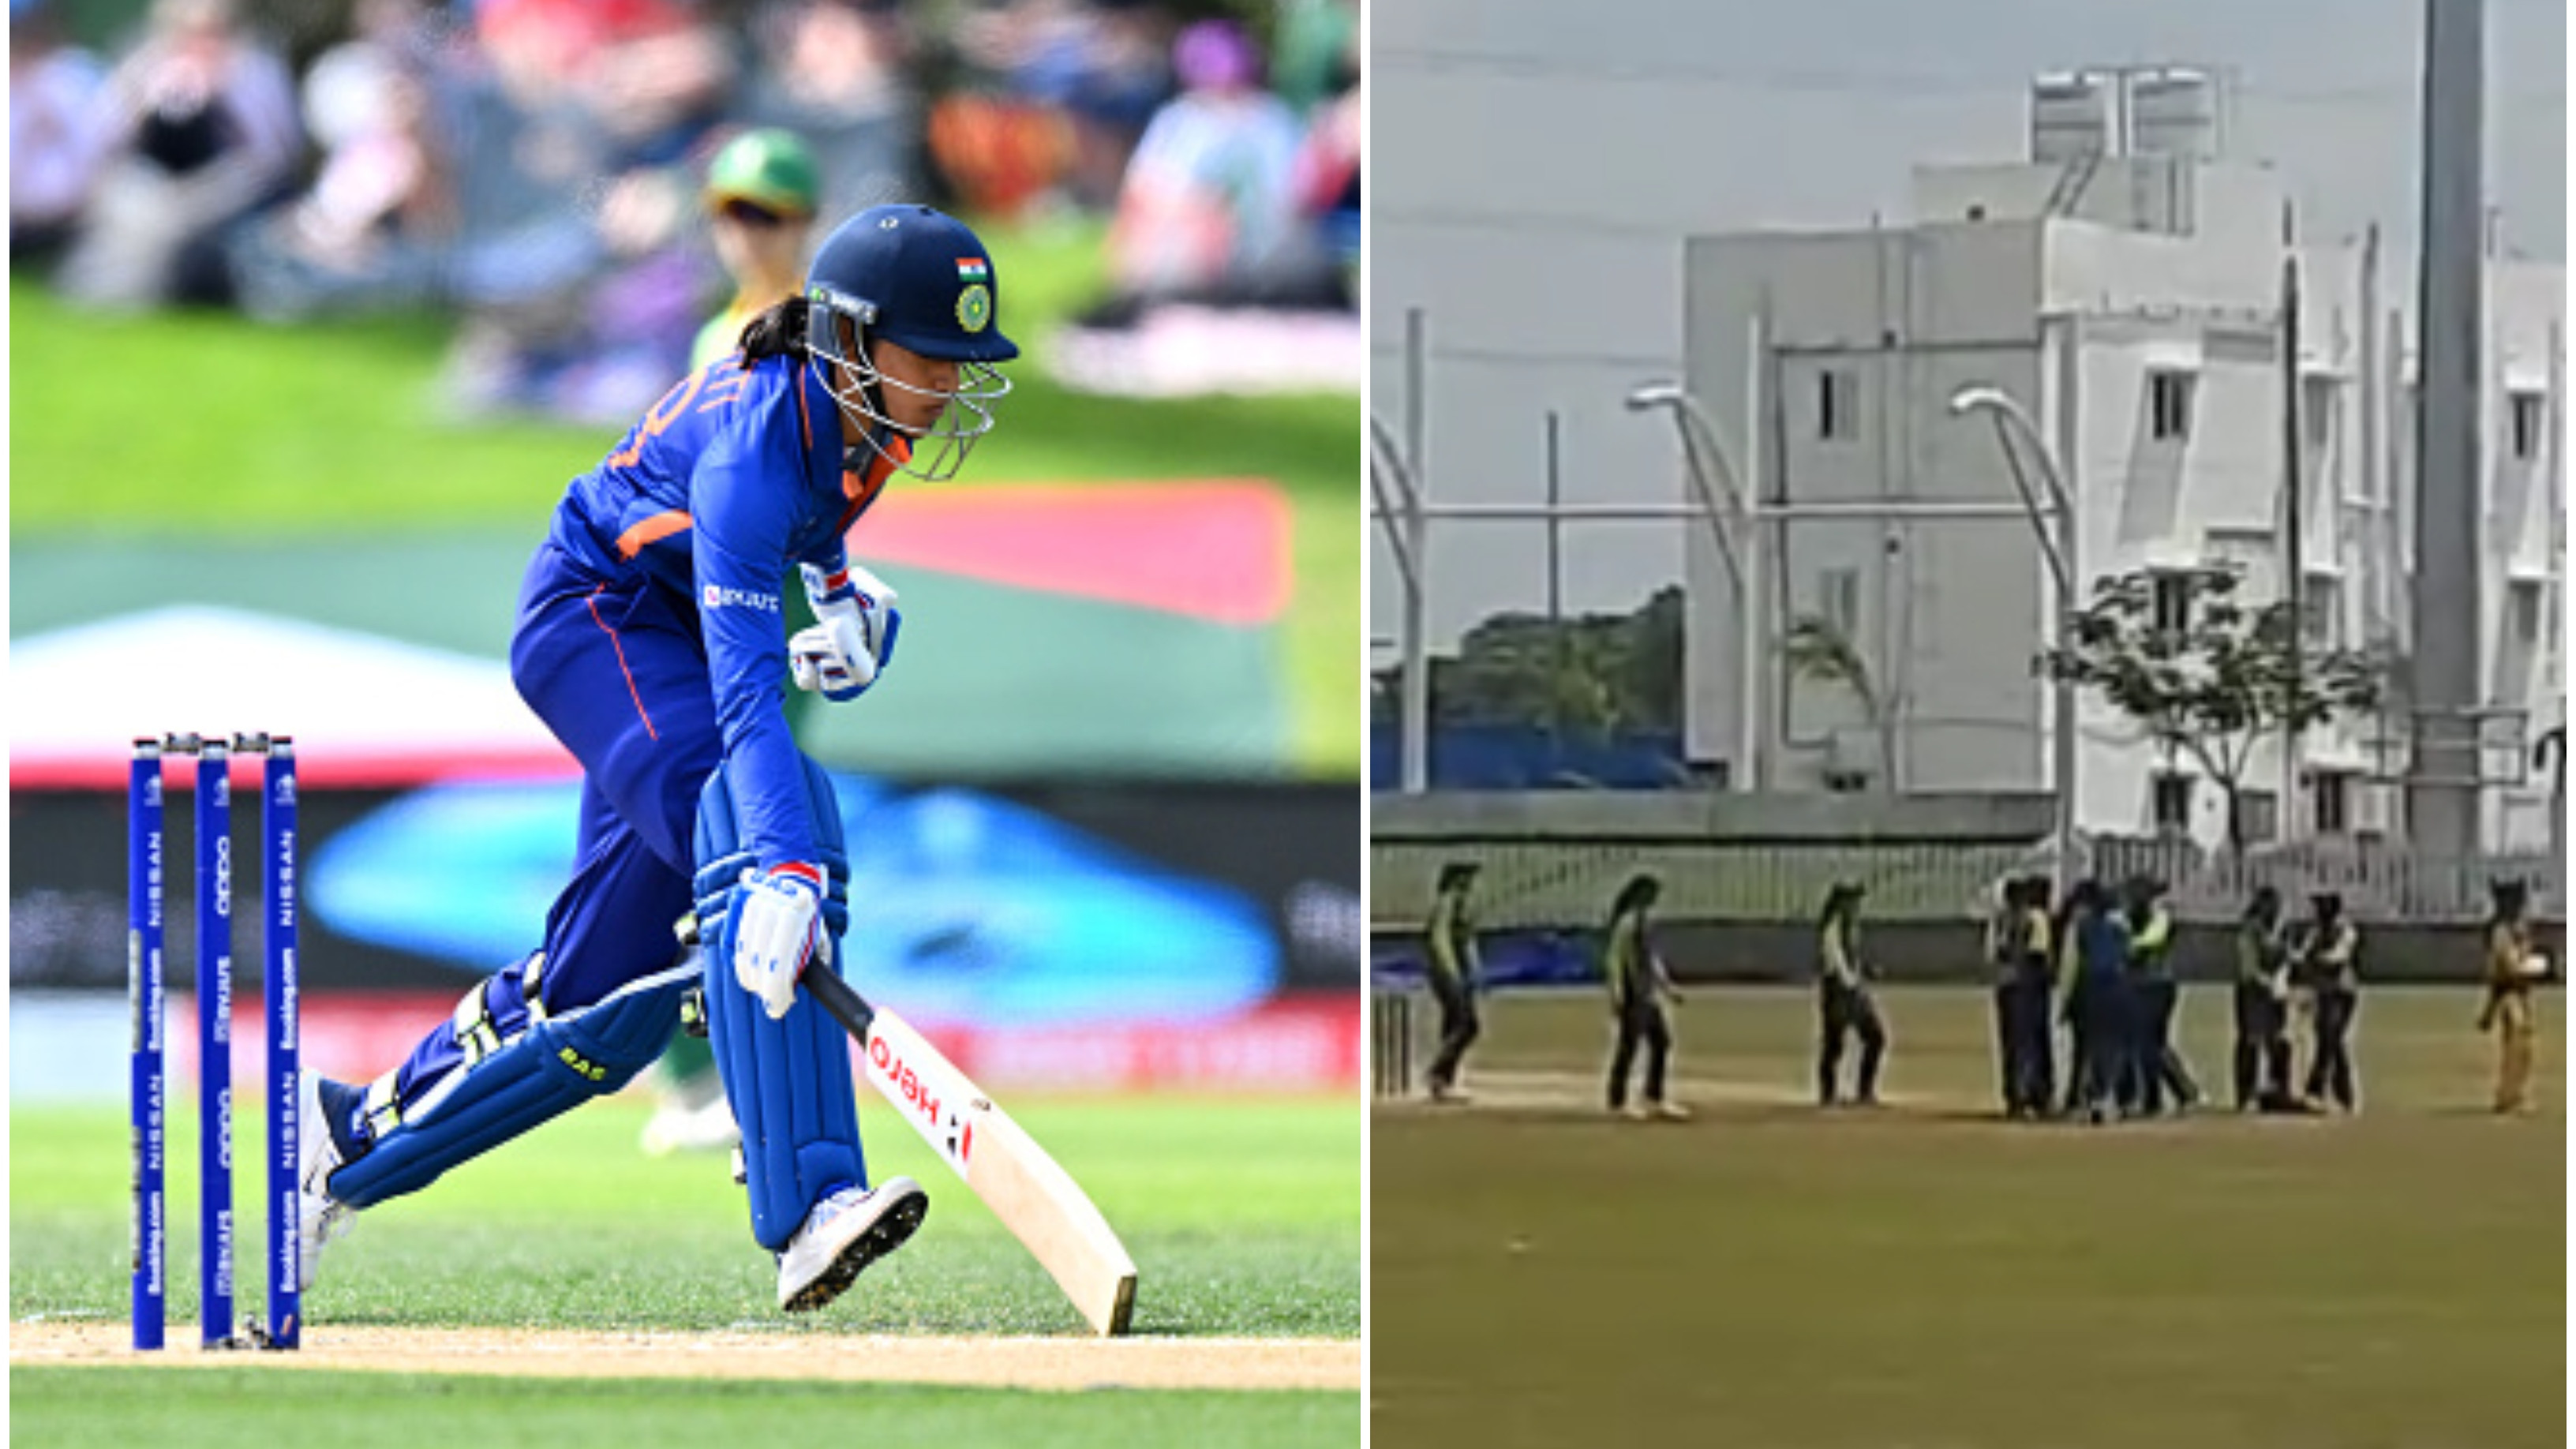 WATCH: Smriti Mandhana engages in a heated exchange with Rajasthan players after ‘Mankad’ run-out 